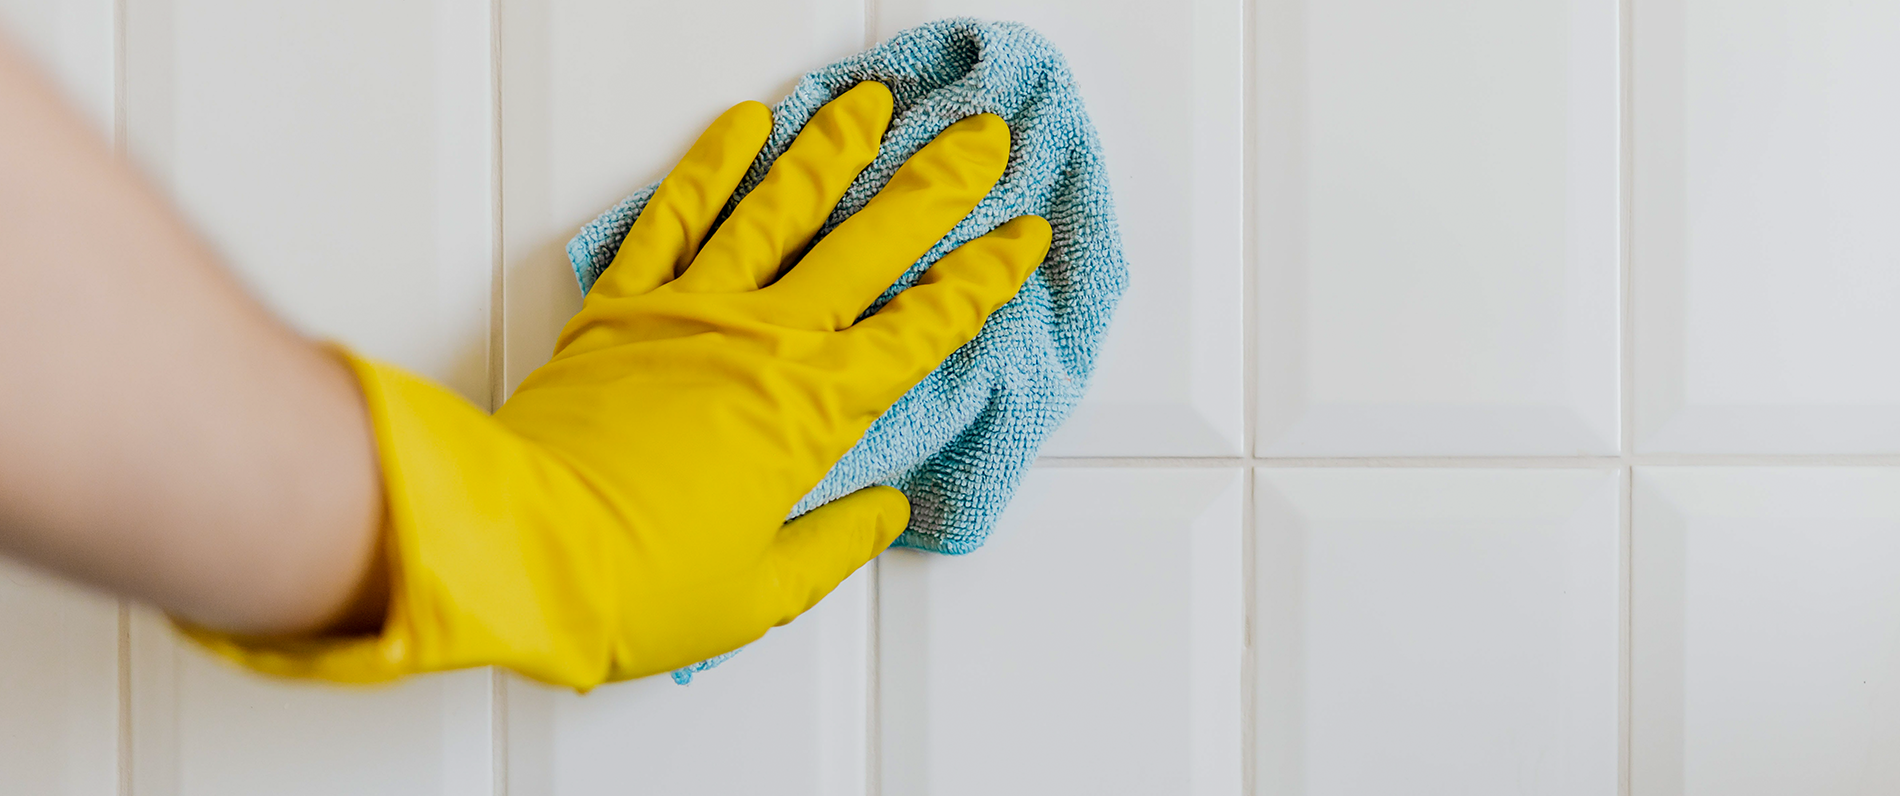 person cleaning with gloves on